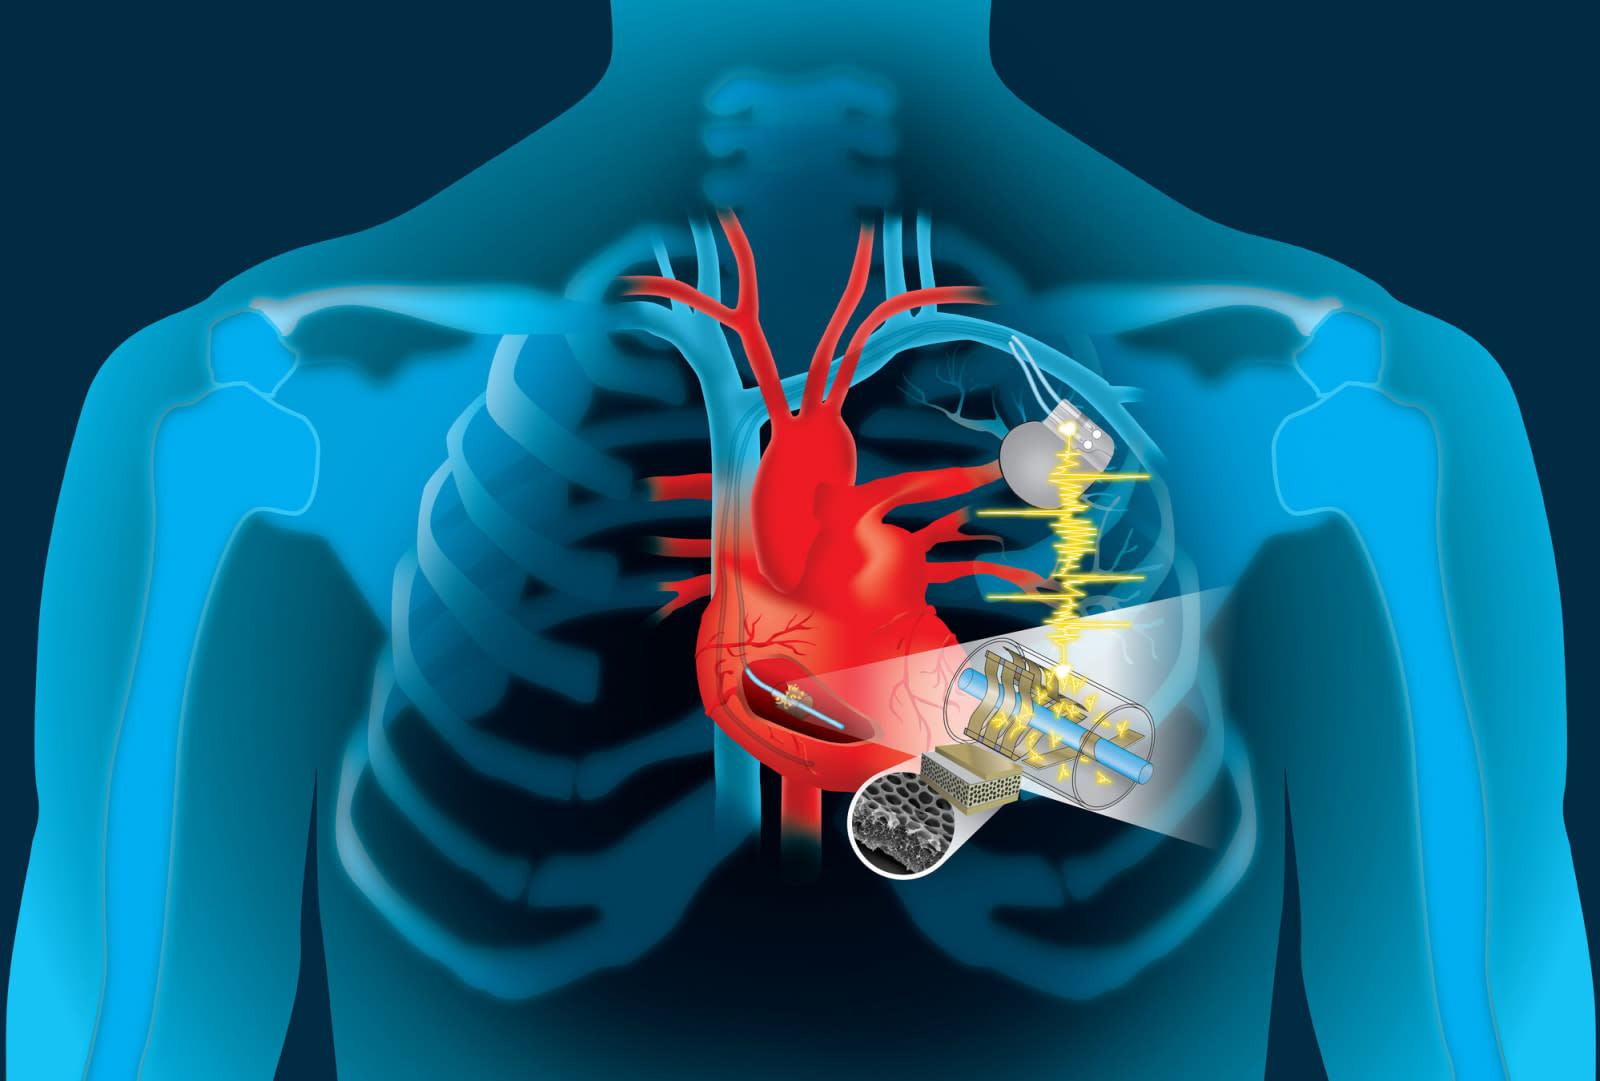 Self-charging pacemakers are powered by patients' heartbeats | Engadget